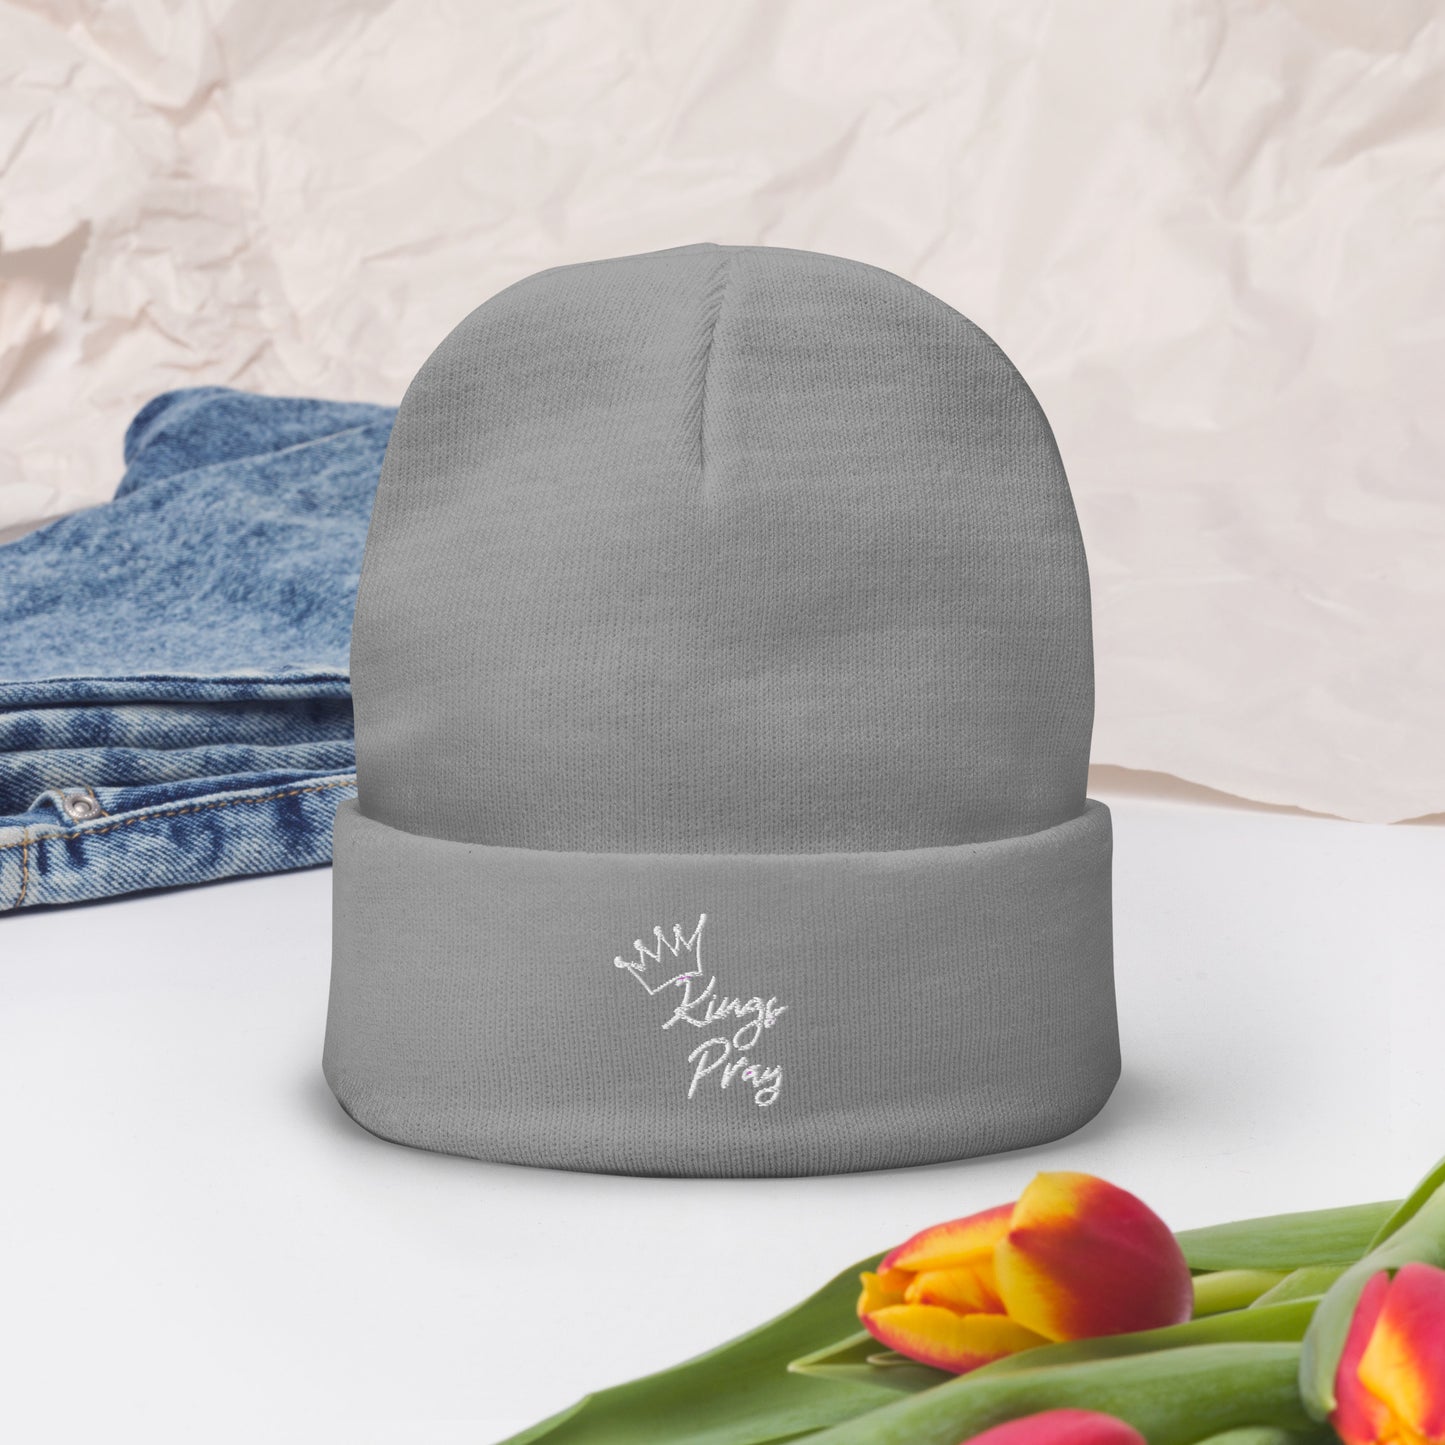 King's Pray Embroidered Beanie